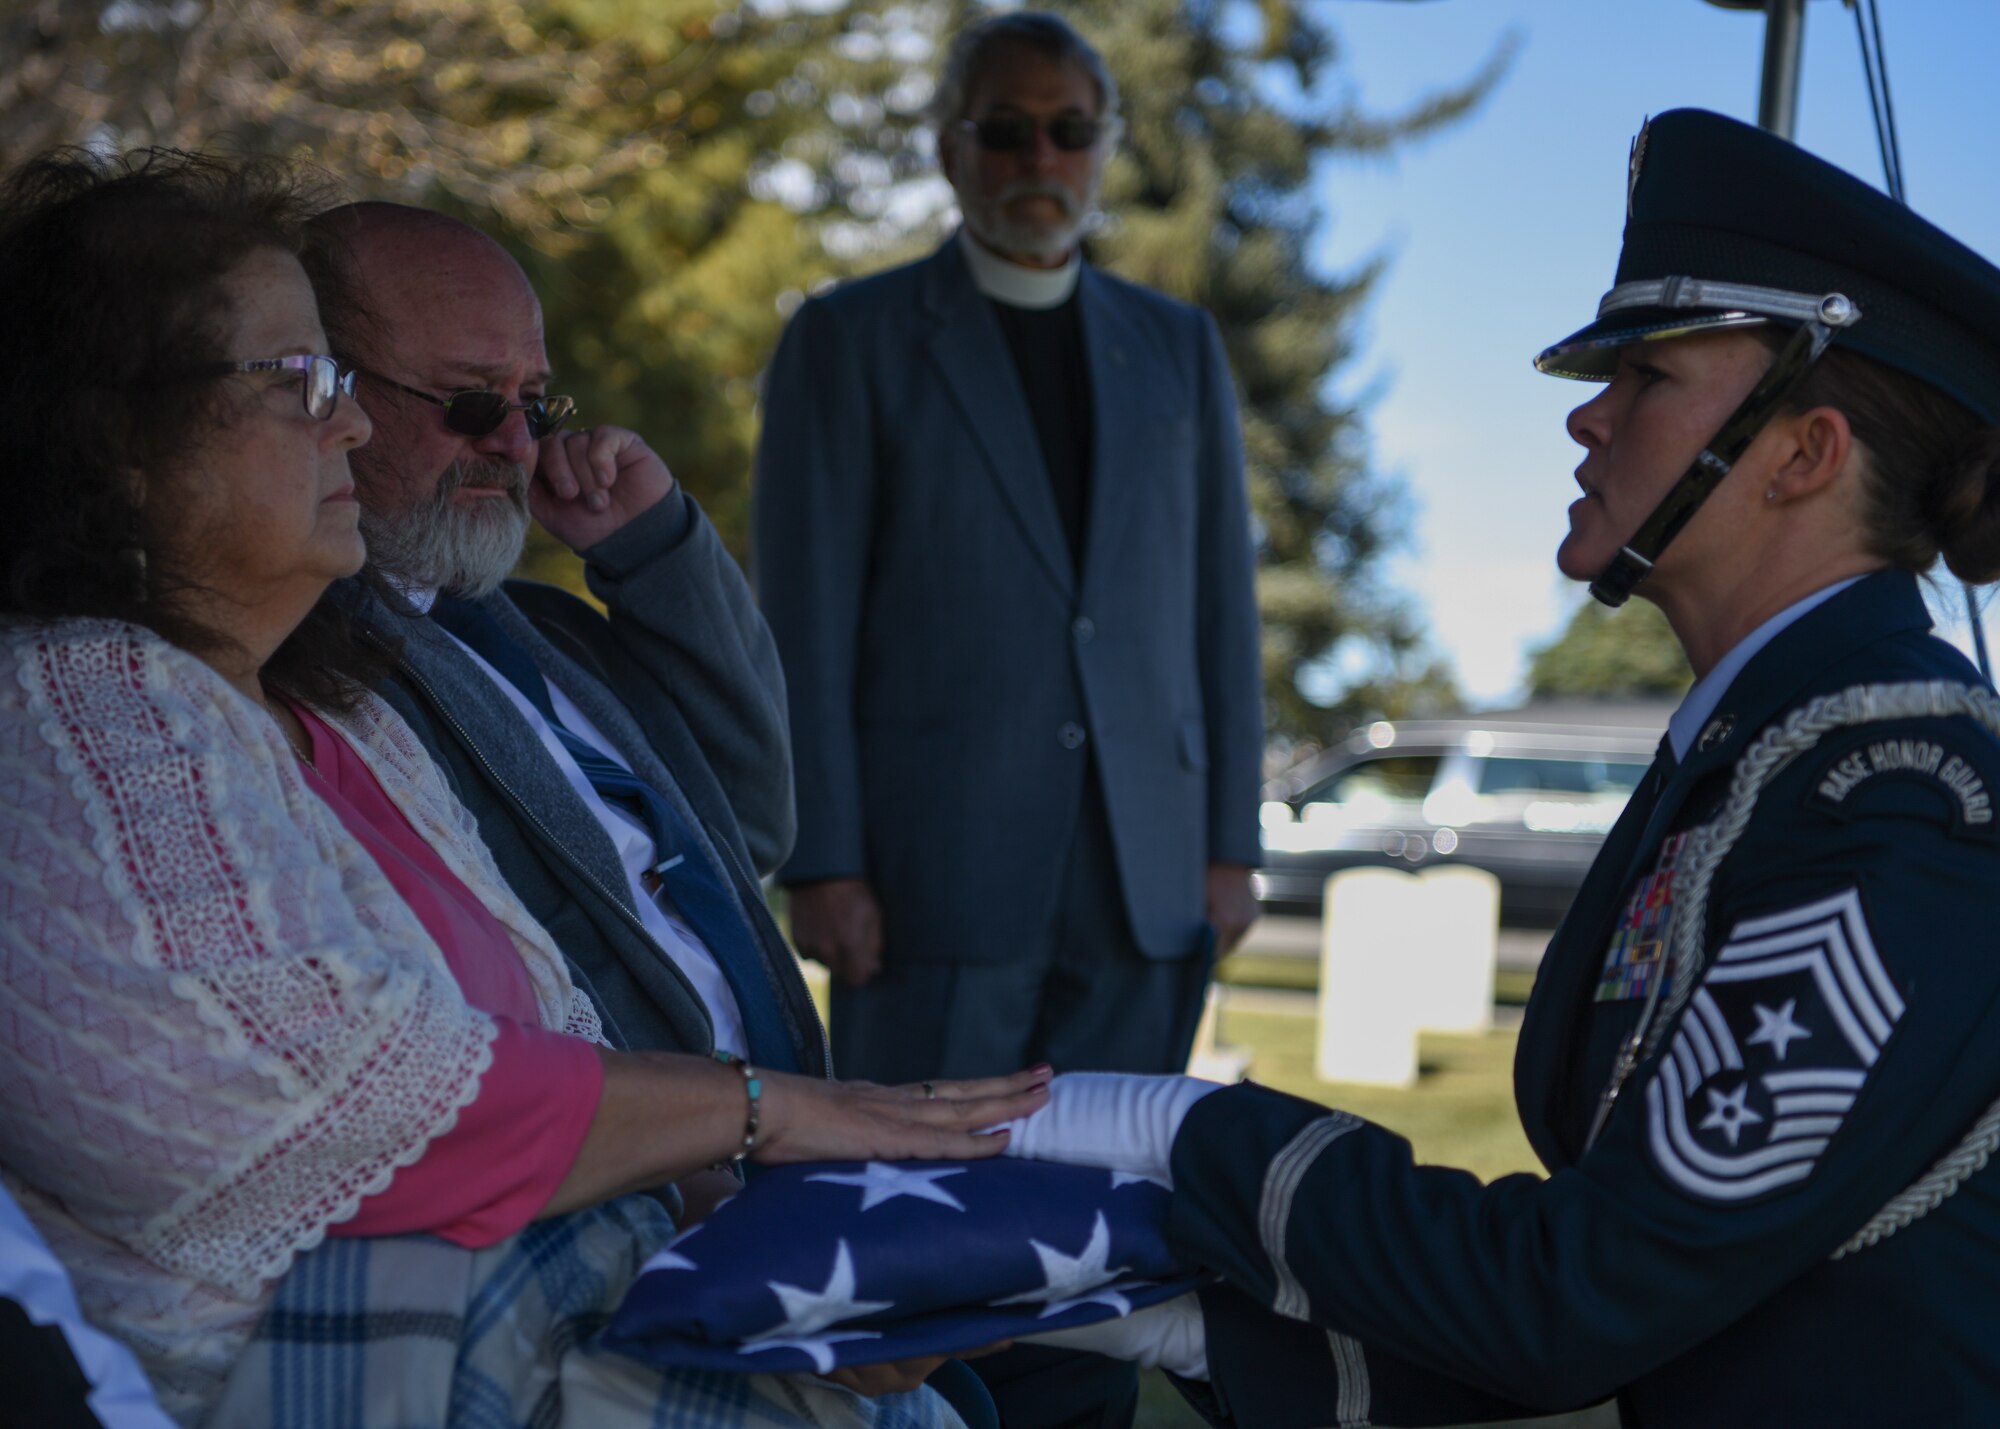 Chief Master Sgt. Tiffany Bettisworth, 90th Missile Wing command chief, presents the American flag to retired Master Sgt. Robert Meadows next-of-kin, on Oct. 22, 2019, on F.E. Warren Air Force Base, Wyo. While serving, Meadows provided critical, high precision geospatial and geophysical information for defense and intelligence needs around the world. (U.S. Air Force photo by Senior Airman Nicole Reed)